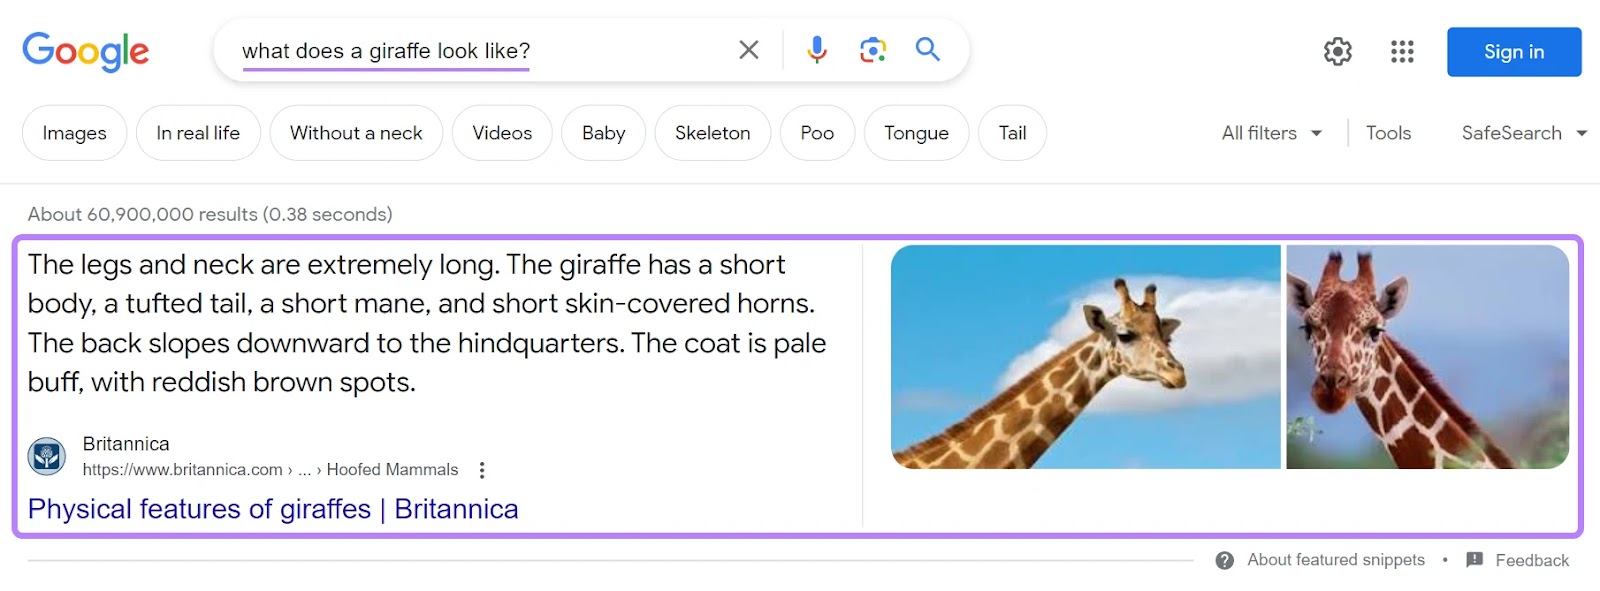 A featured snippet on Google's SERP for "what does a giraffe look like" query